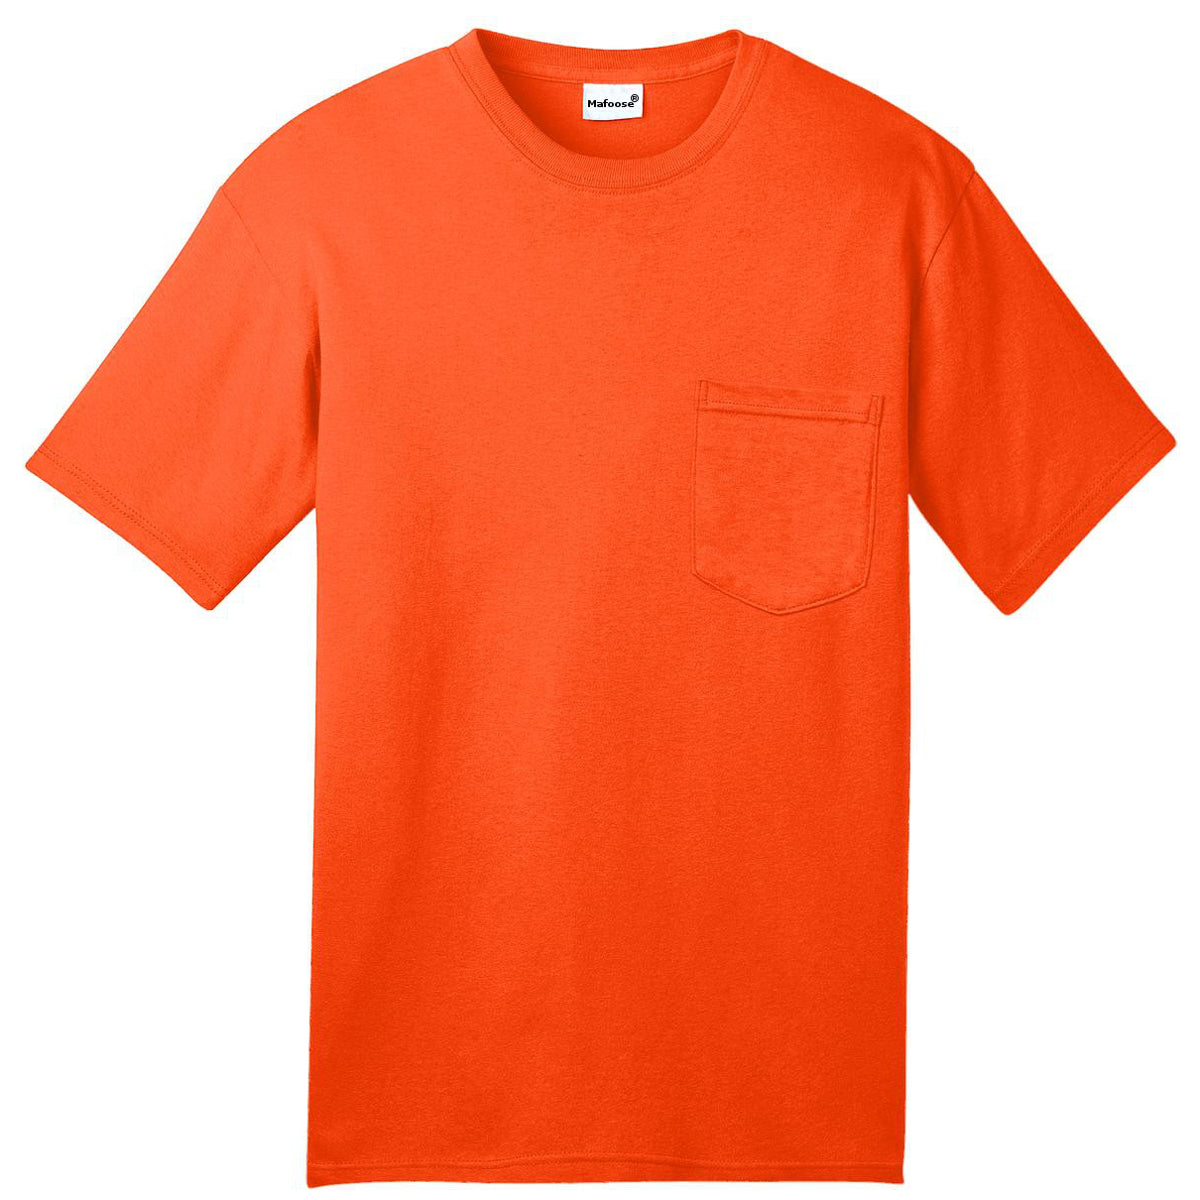 Mafoose Men's All American Tee Shirt with Pocket Safety Orange-Front